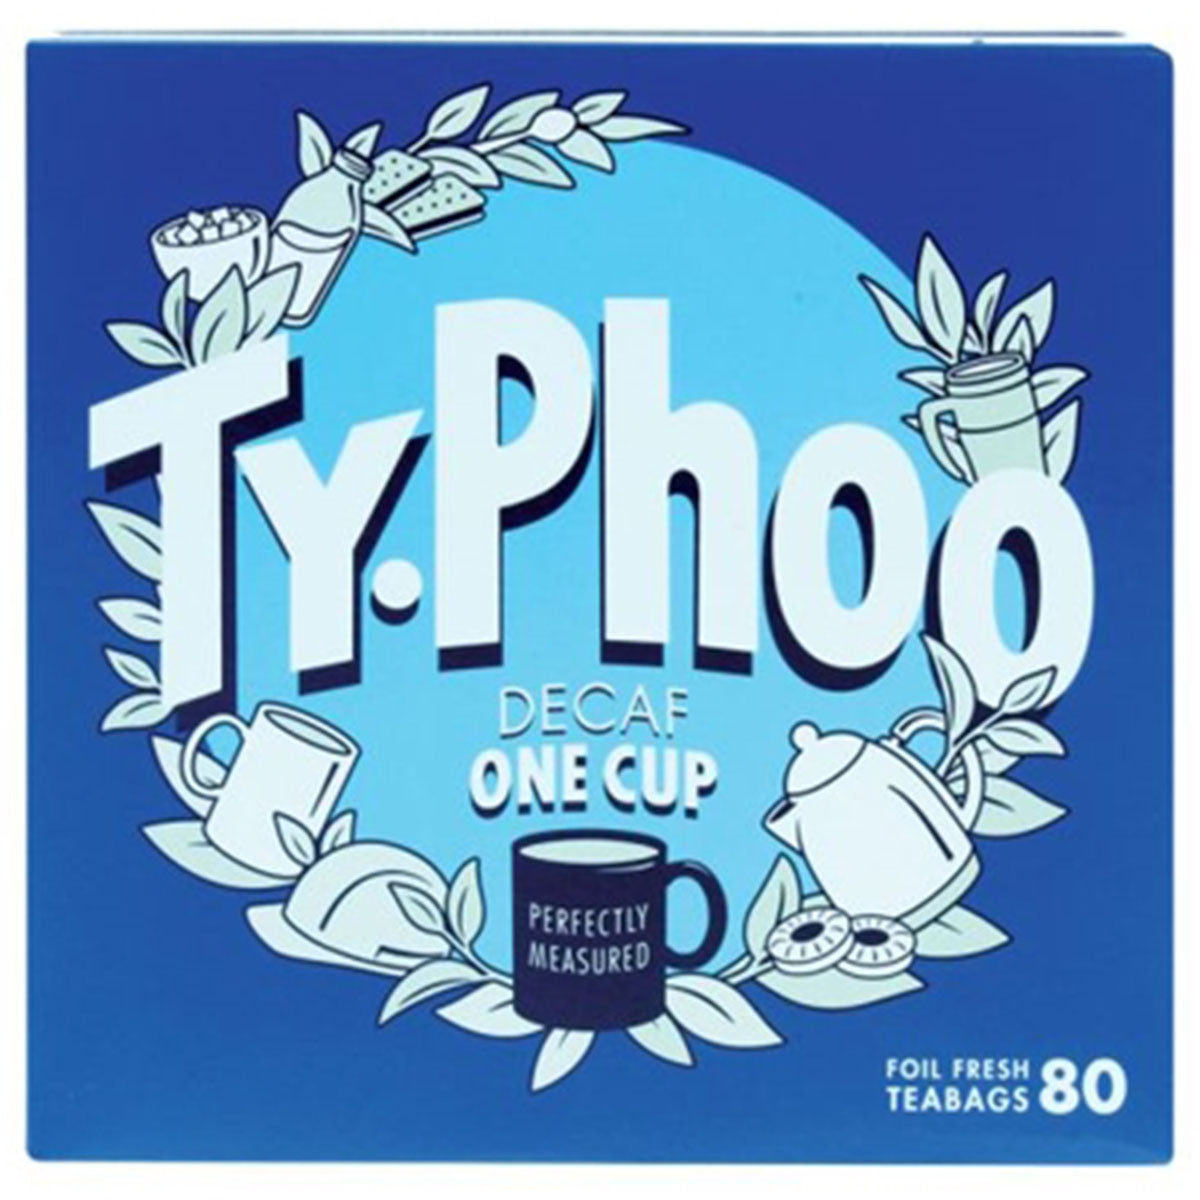 Typhoo - One Cup Decaf 80 Foil Fresh Tea Bags - 160g - Continental Food Store